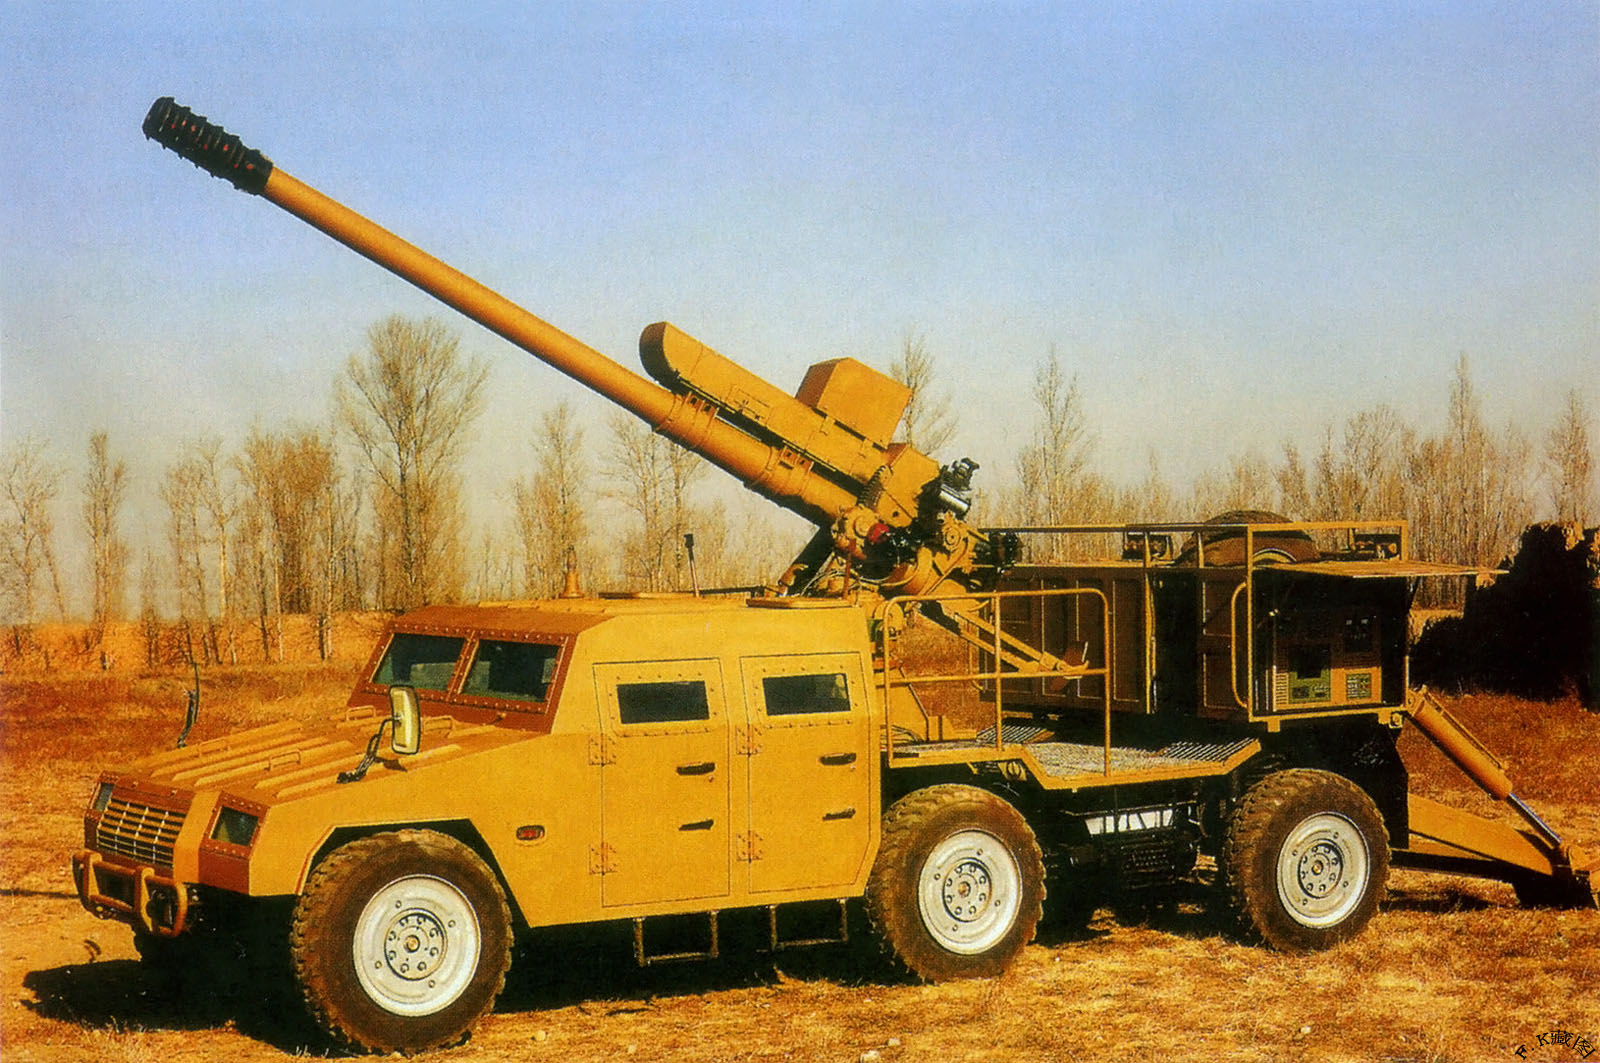 Chinese_self_proprelled_wheeled_howitzer_sh-2+122mm+pla+army+export+People%2527s+Liberation+Army++%2528PLA%2529++%25283%2529.jpg